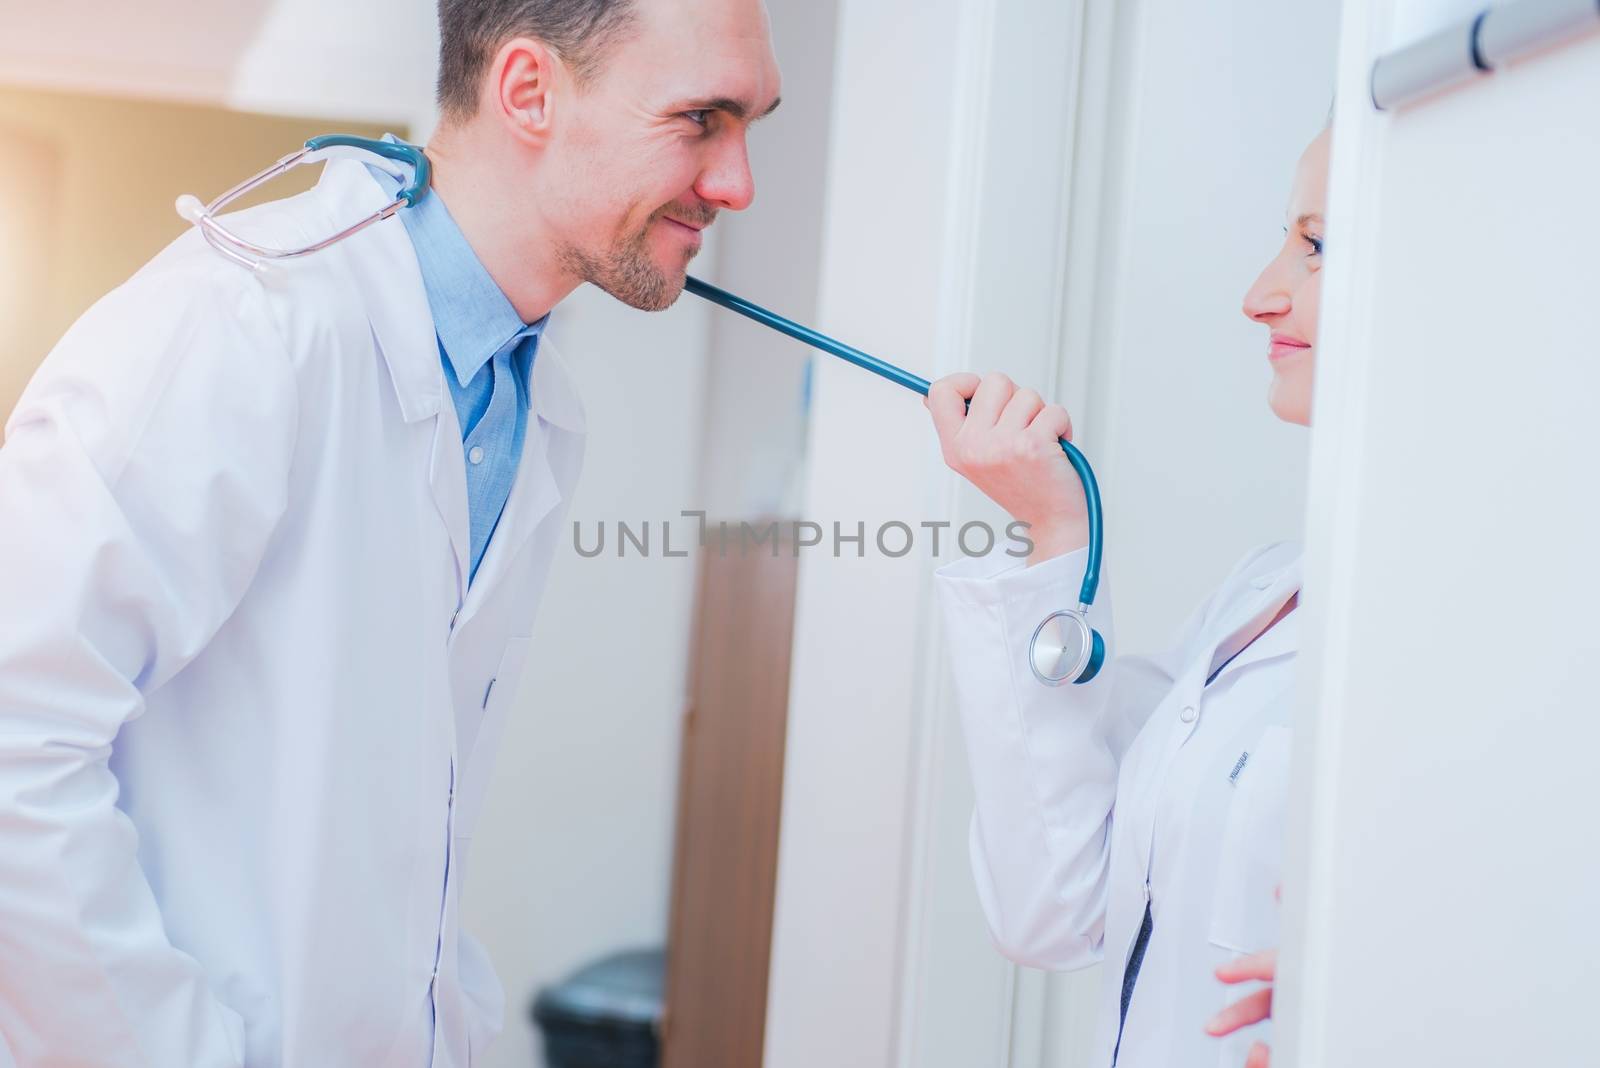 Workplace Romance Concept. Two Doctors Having Romance in the Hospital. 